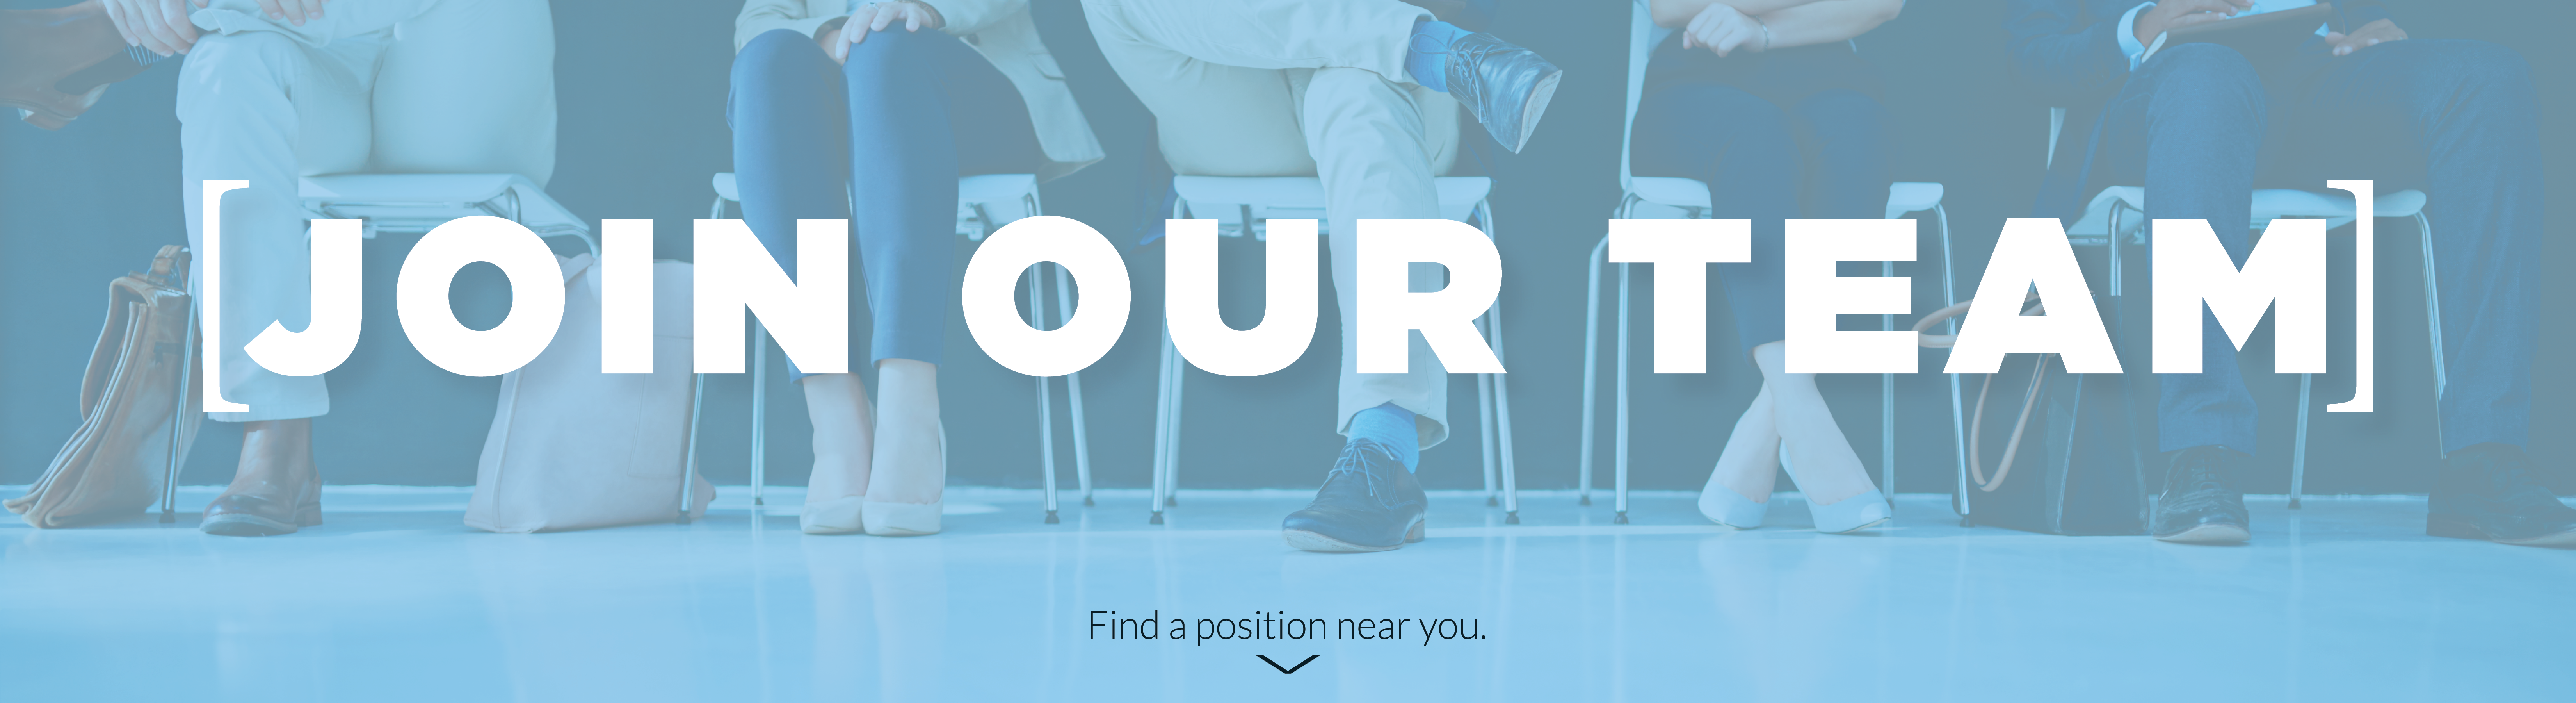 Join our Team - Now Hiring at Anomaly Squared